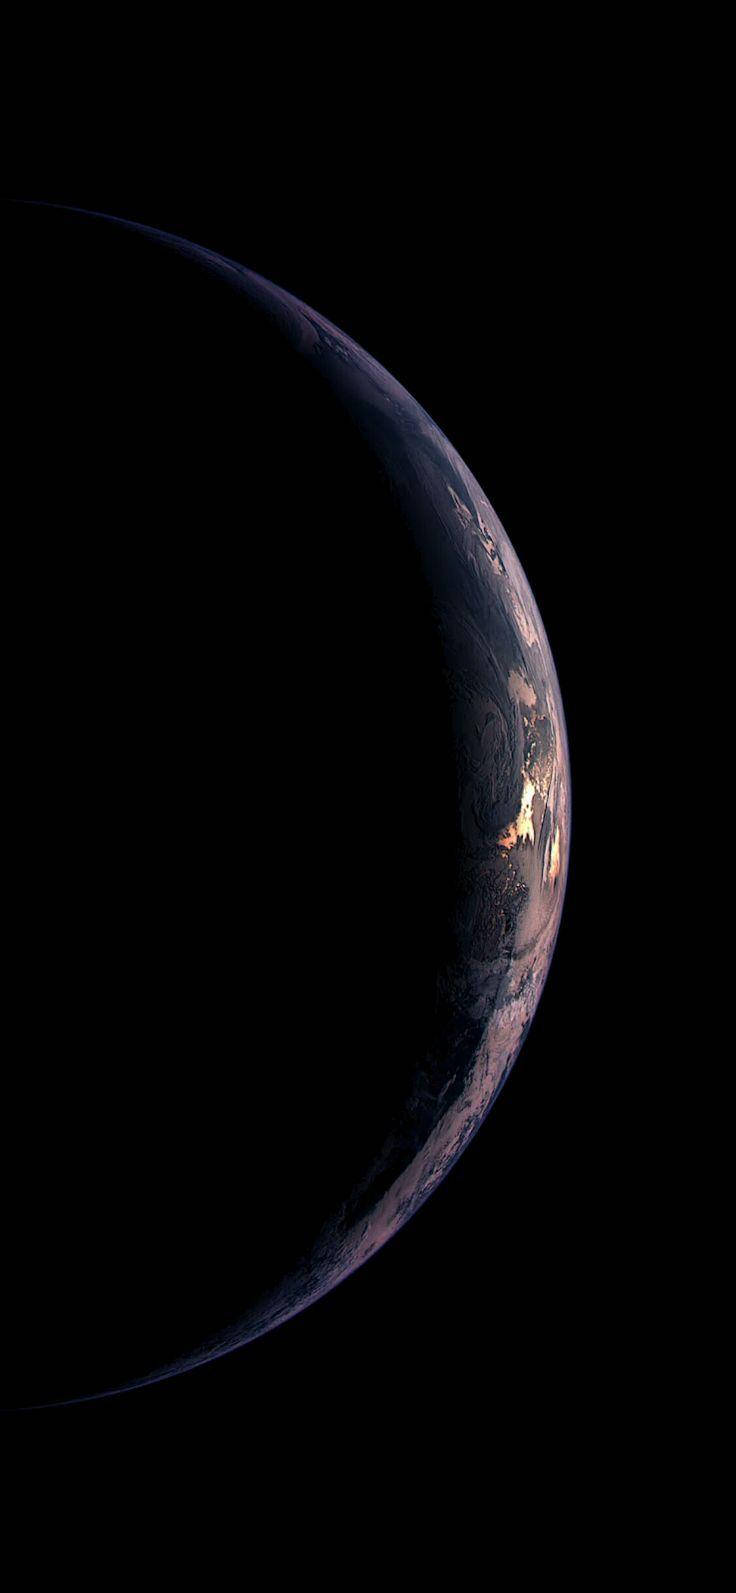 Distinctive Iphone X Amoled Display Featuring A High-resolution Planet Surface Image.